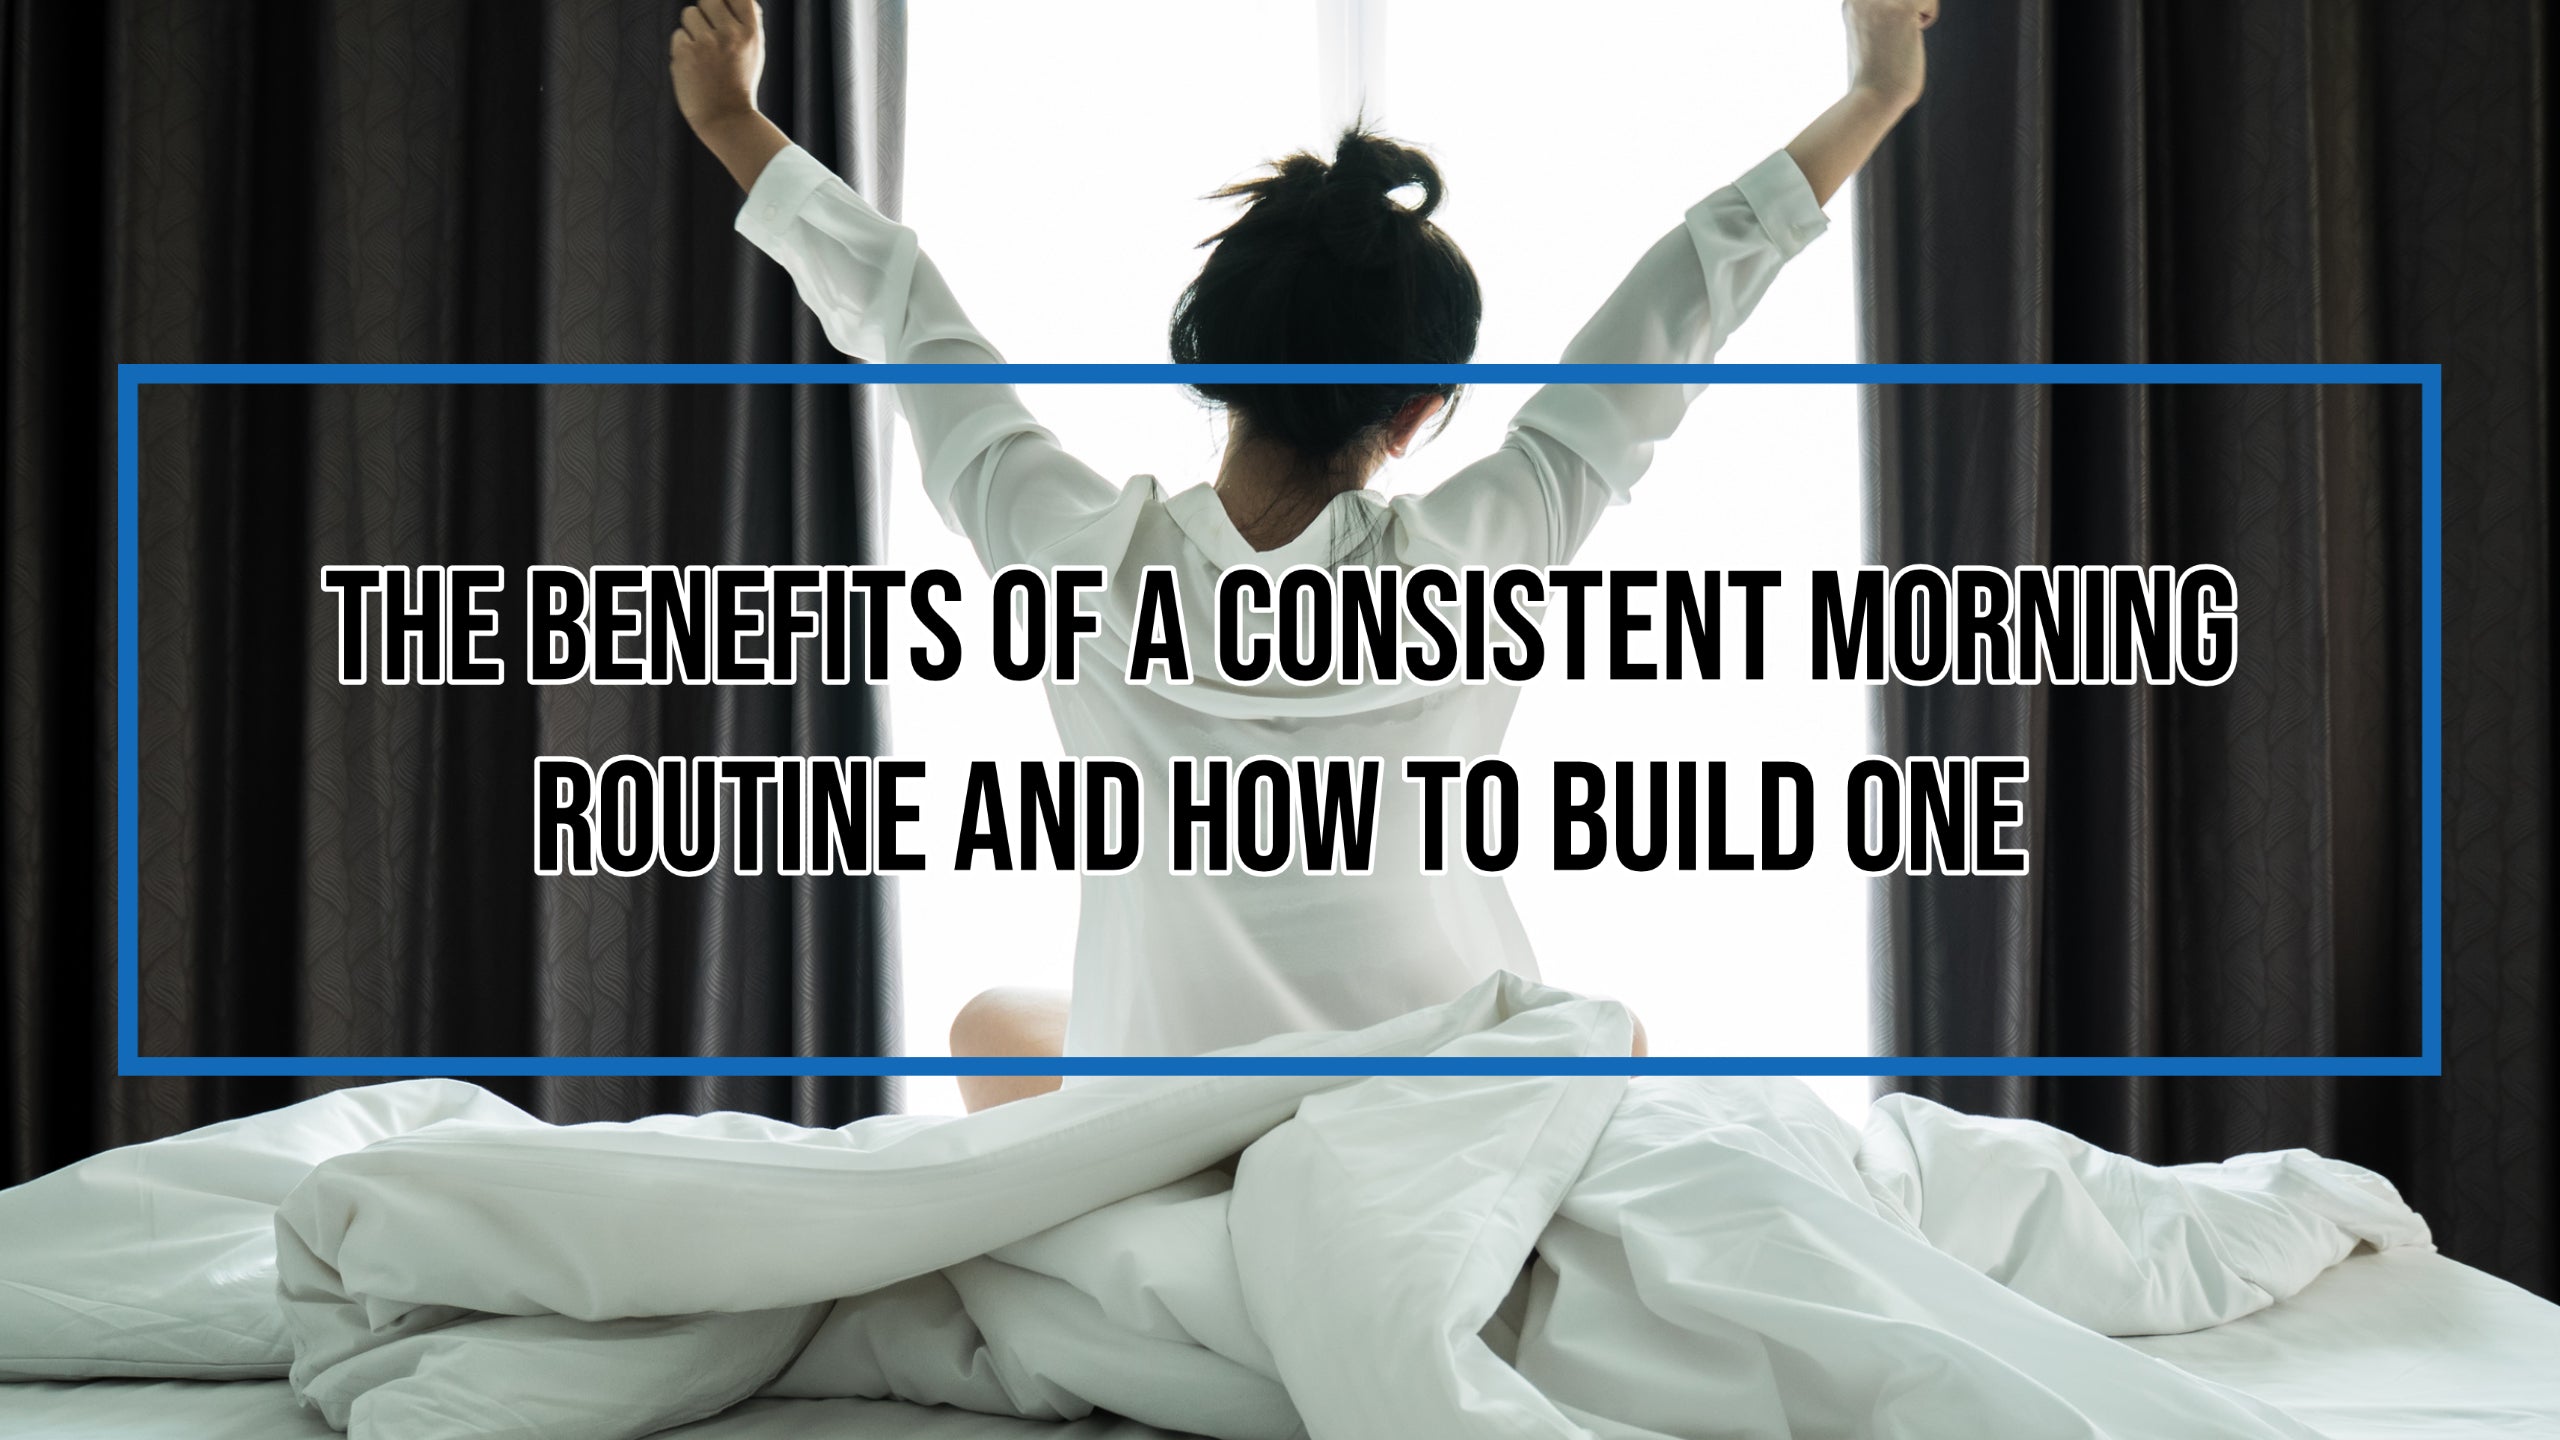 The Benefits Of A Consistent Morning Routine And How to Build One